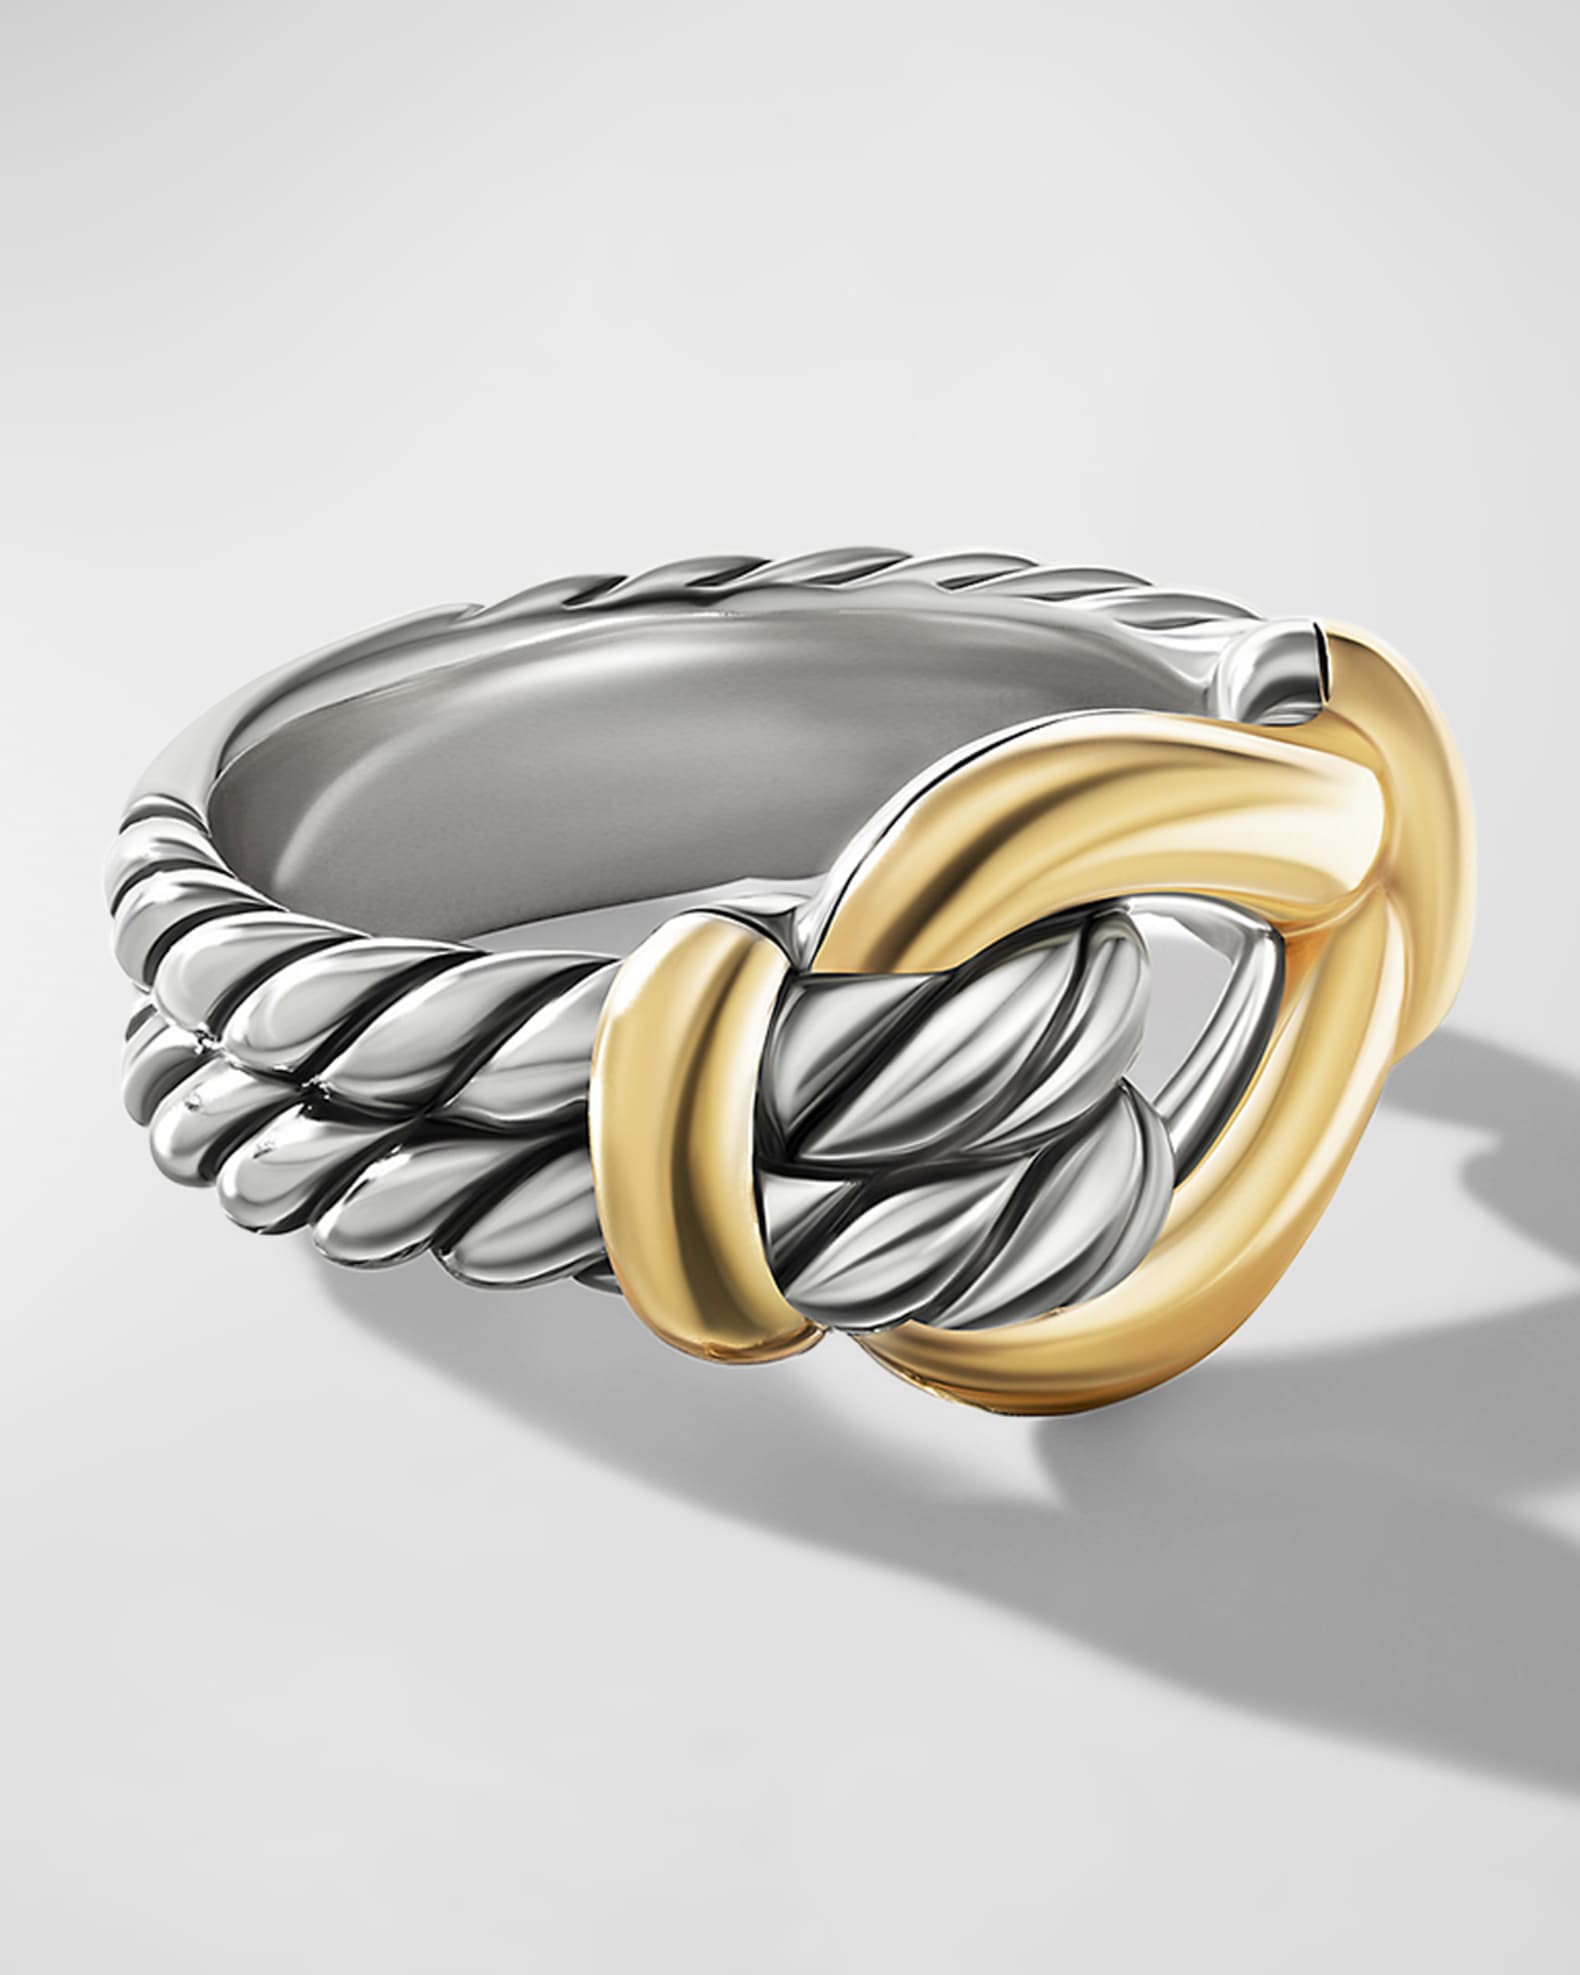 David Yurman Thoroughbred Loop Ring in Silver with 18K Gold, 13mm ...